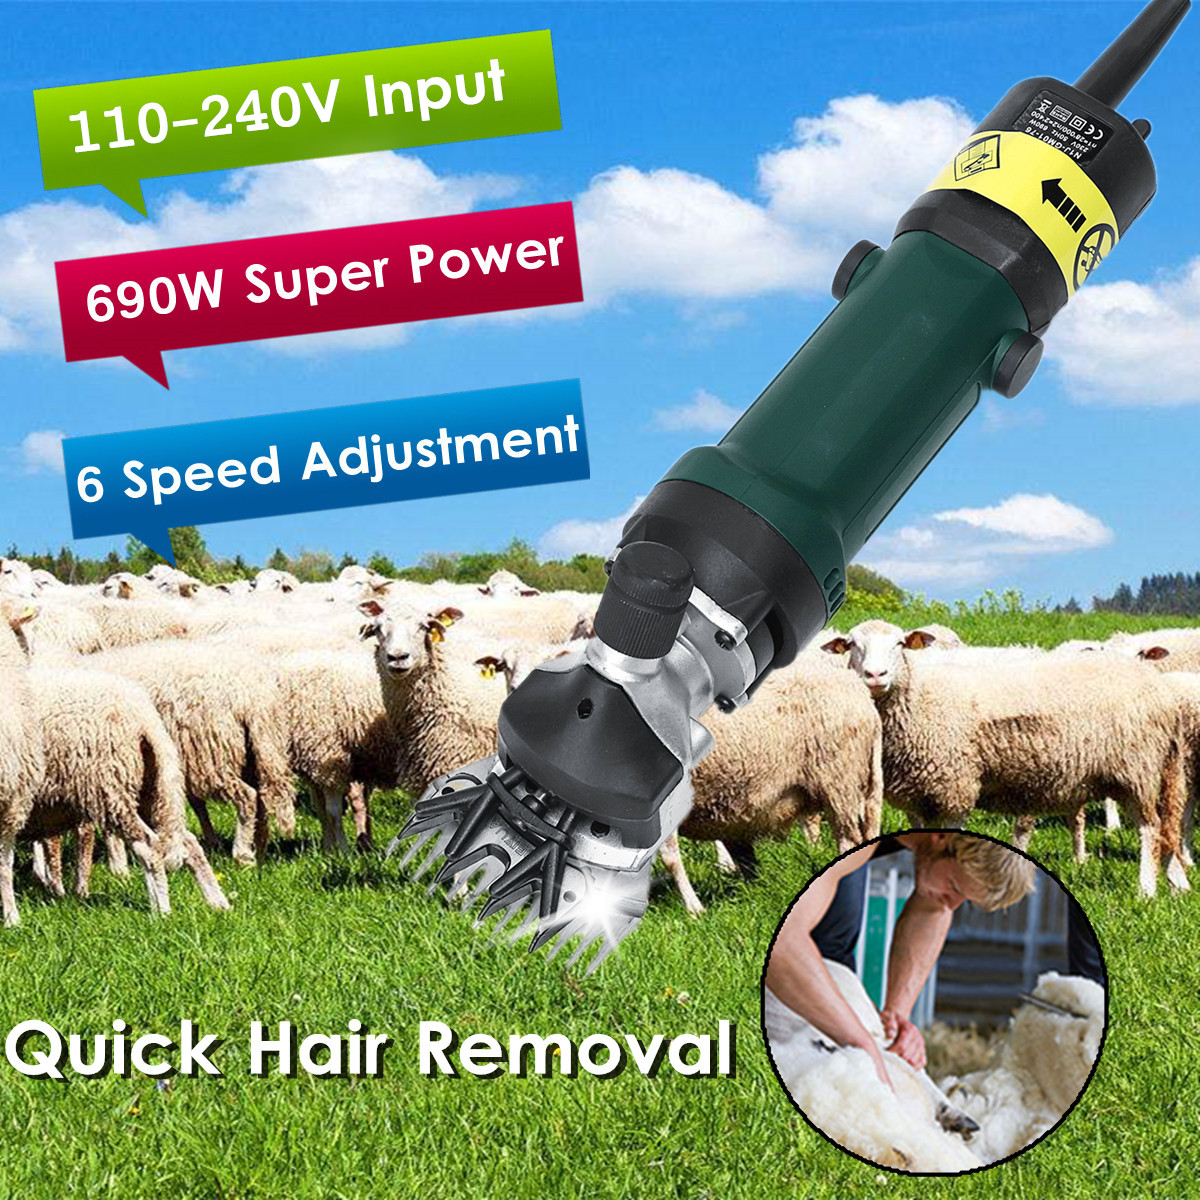 690W-6-Speed-Adjustable-Electric-Sheep-Shearing-Clipper-Shears-Goats-Hair-Removal-Trimmer-1323344-1